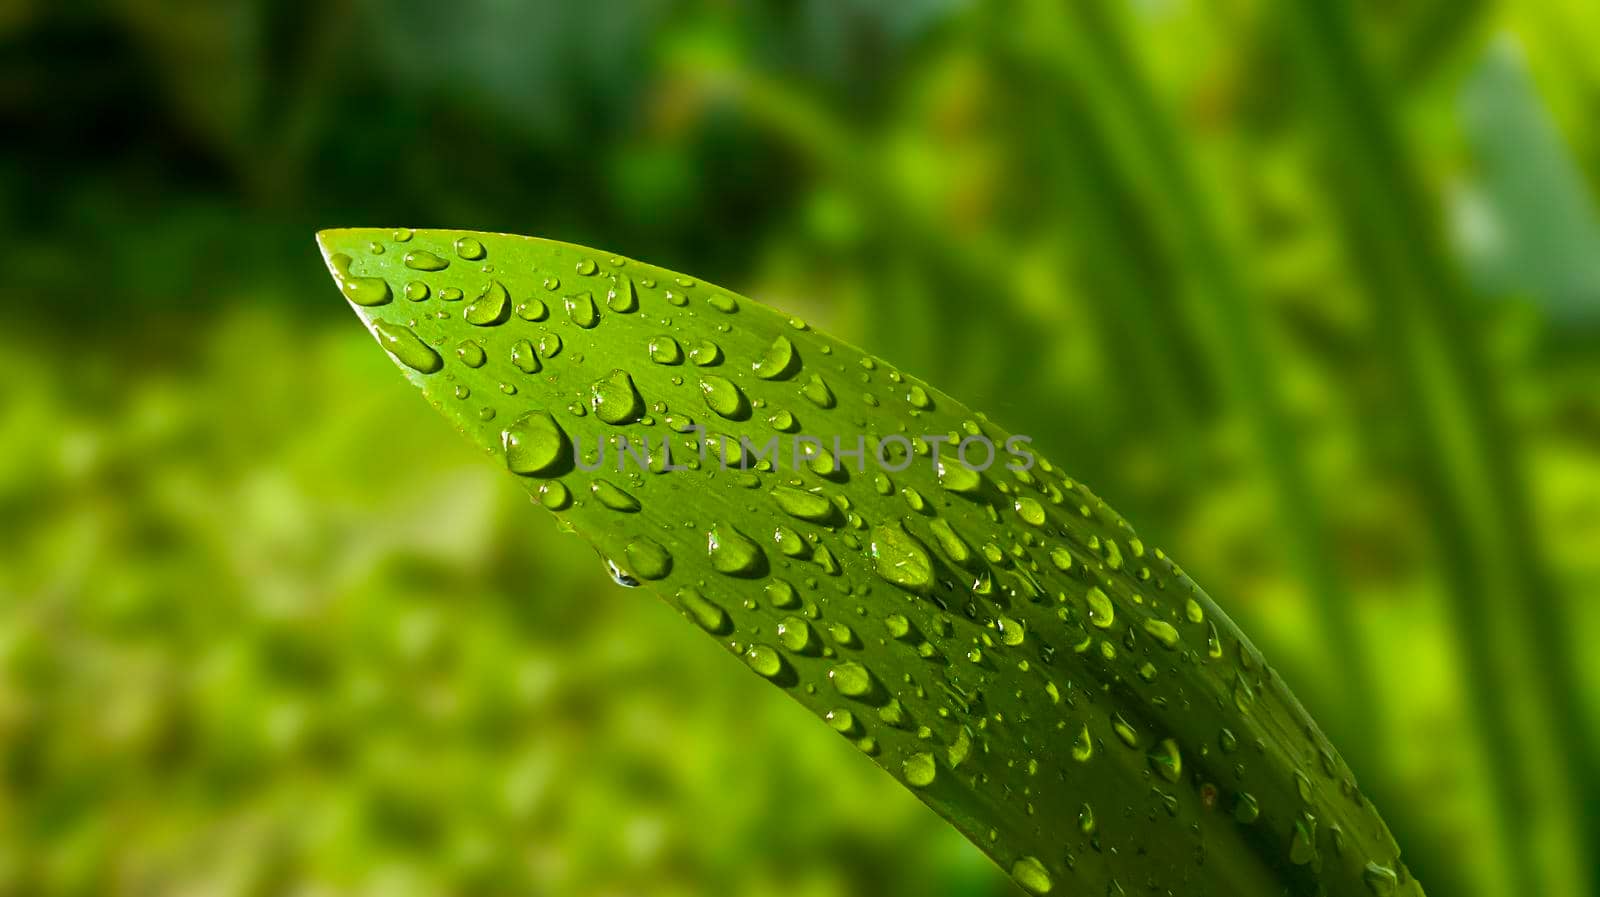 Large beautiful drops of transparent rain water on a green green leaf. Drops of dew or water drop in the morning glow by the sun. Beautiful leaf texture in nature with Natural forest background.